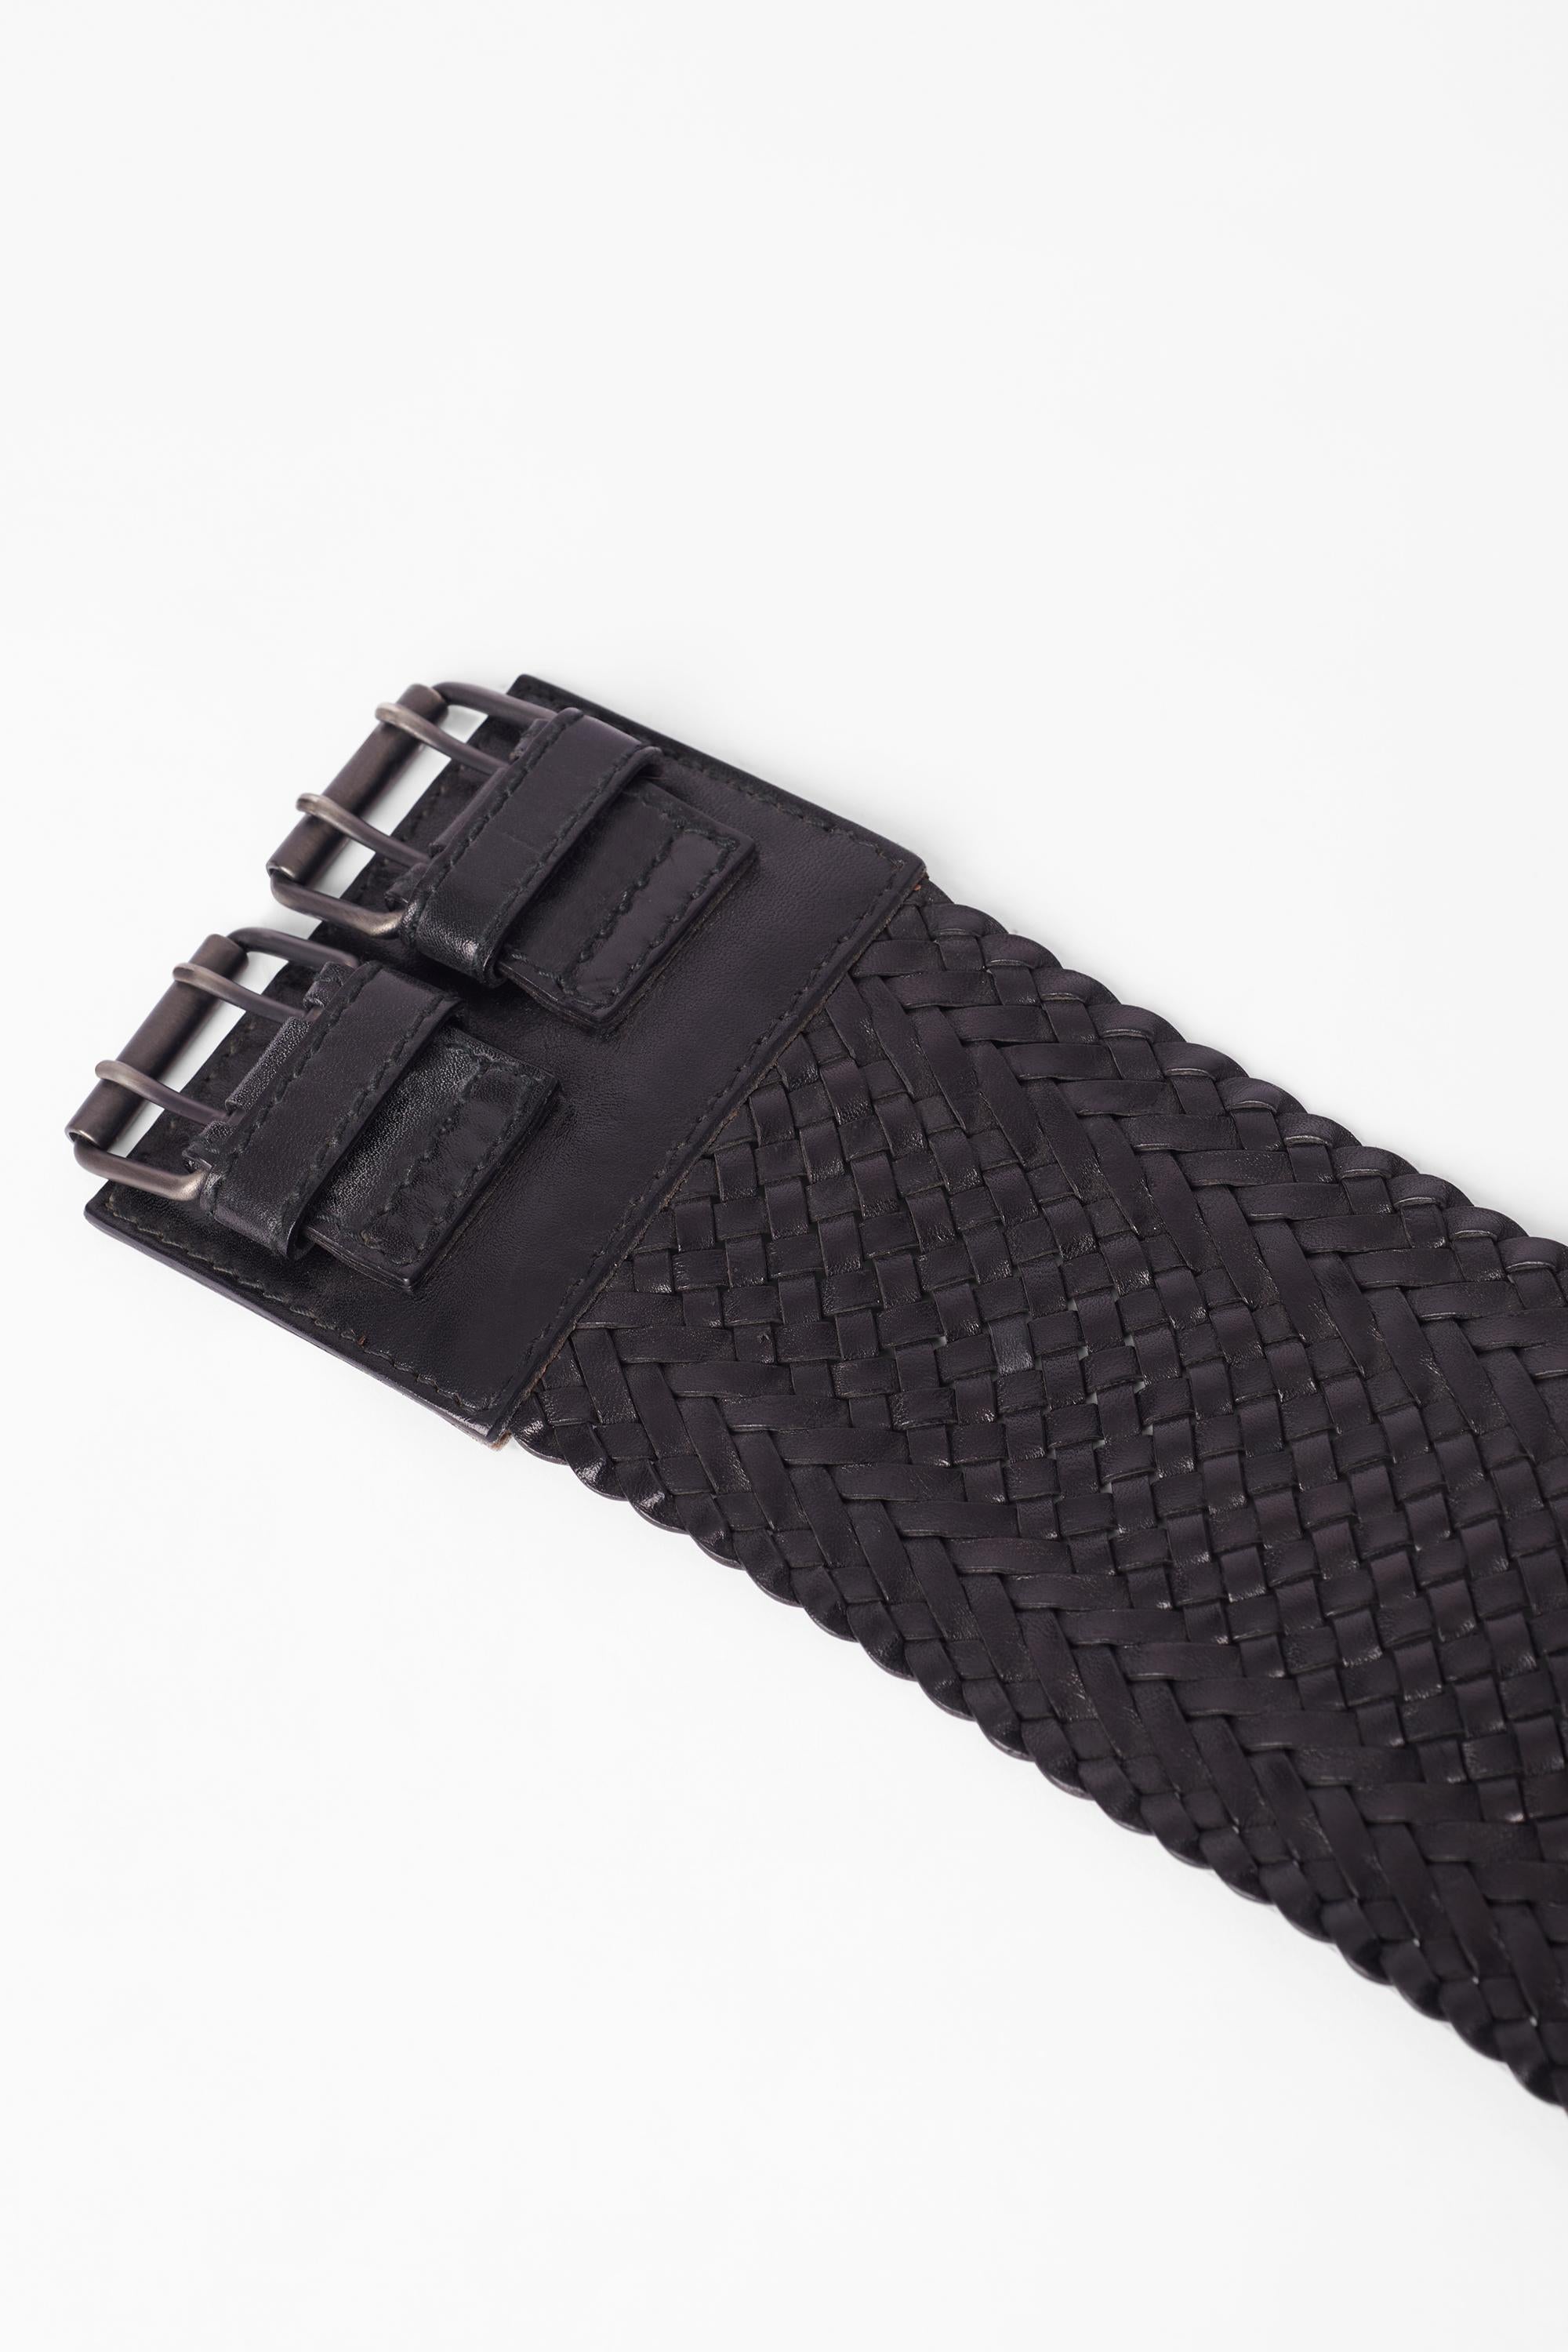 Vintage Fall / Winter 2001 Yves Saint Laurent Rive Gauche by Tom Ford from the Gypsy collection black leather braided large belt. Features a black leather braided style. Fastens with a double front buckle silver closure . As seen on runway , look